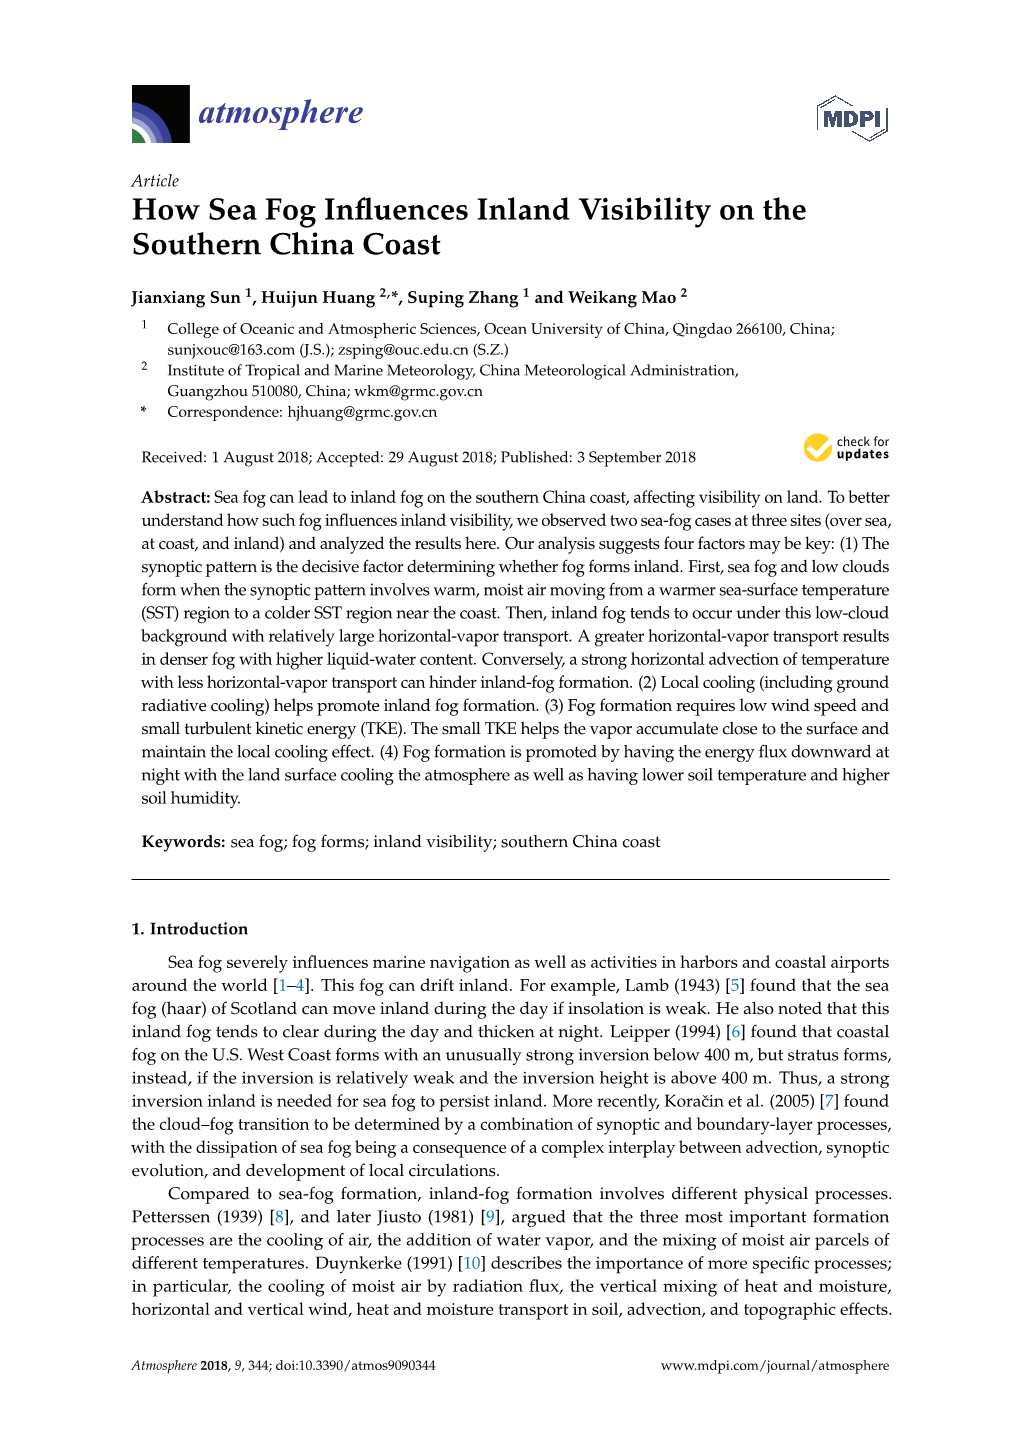 How Sea Fog Influences Inland Visibility on the Southern China Coast